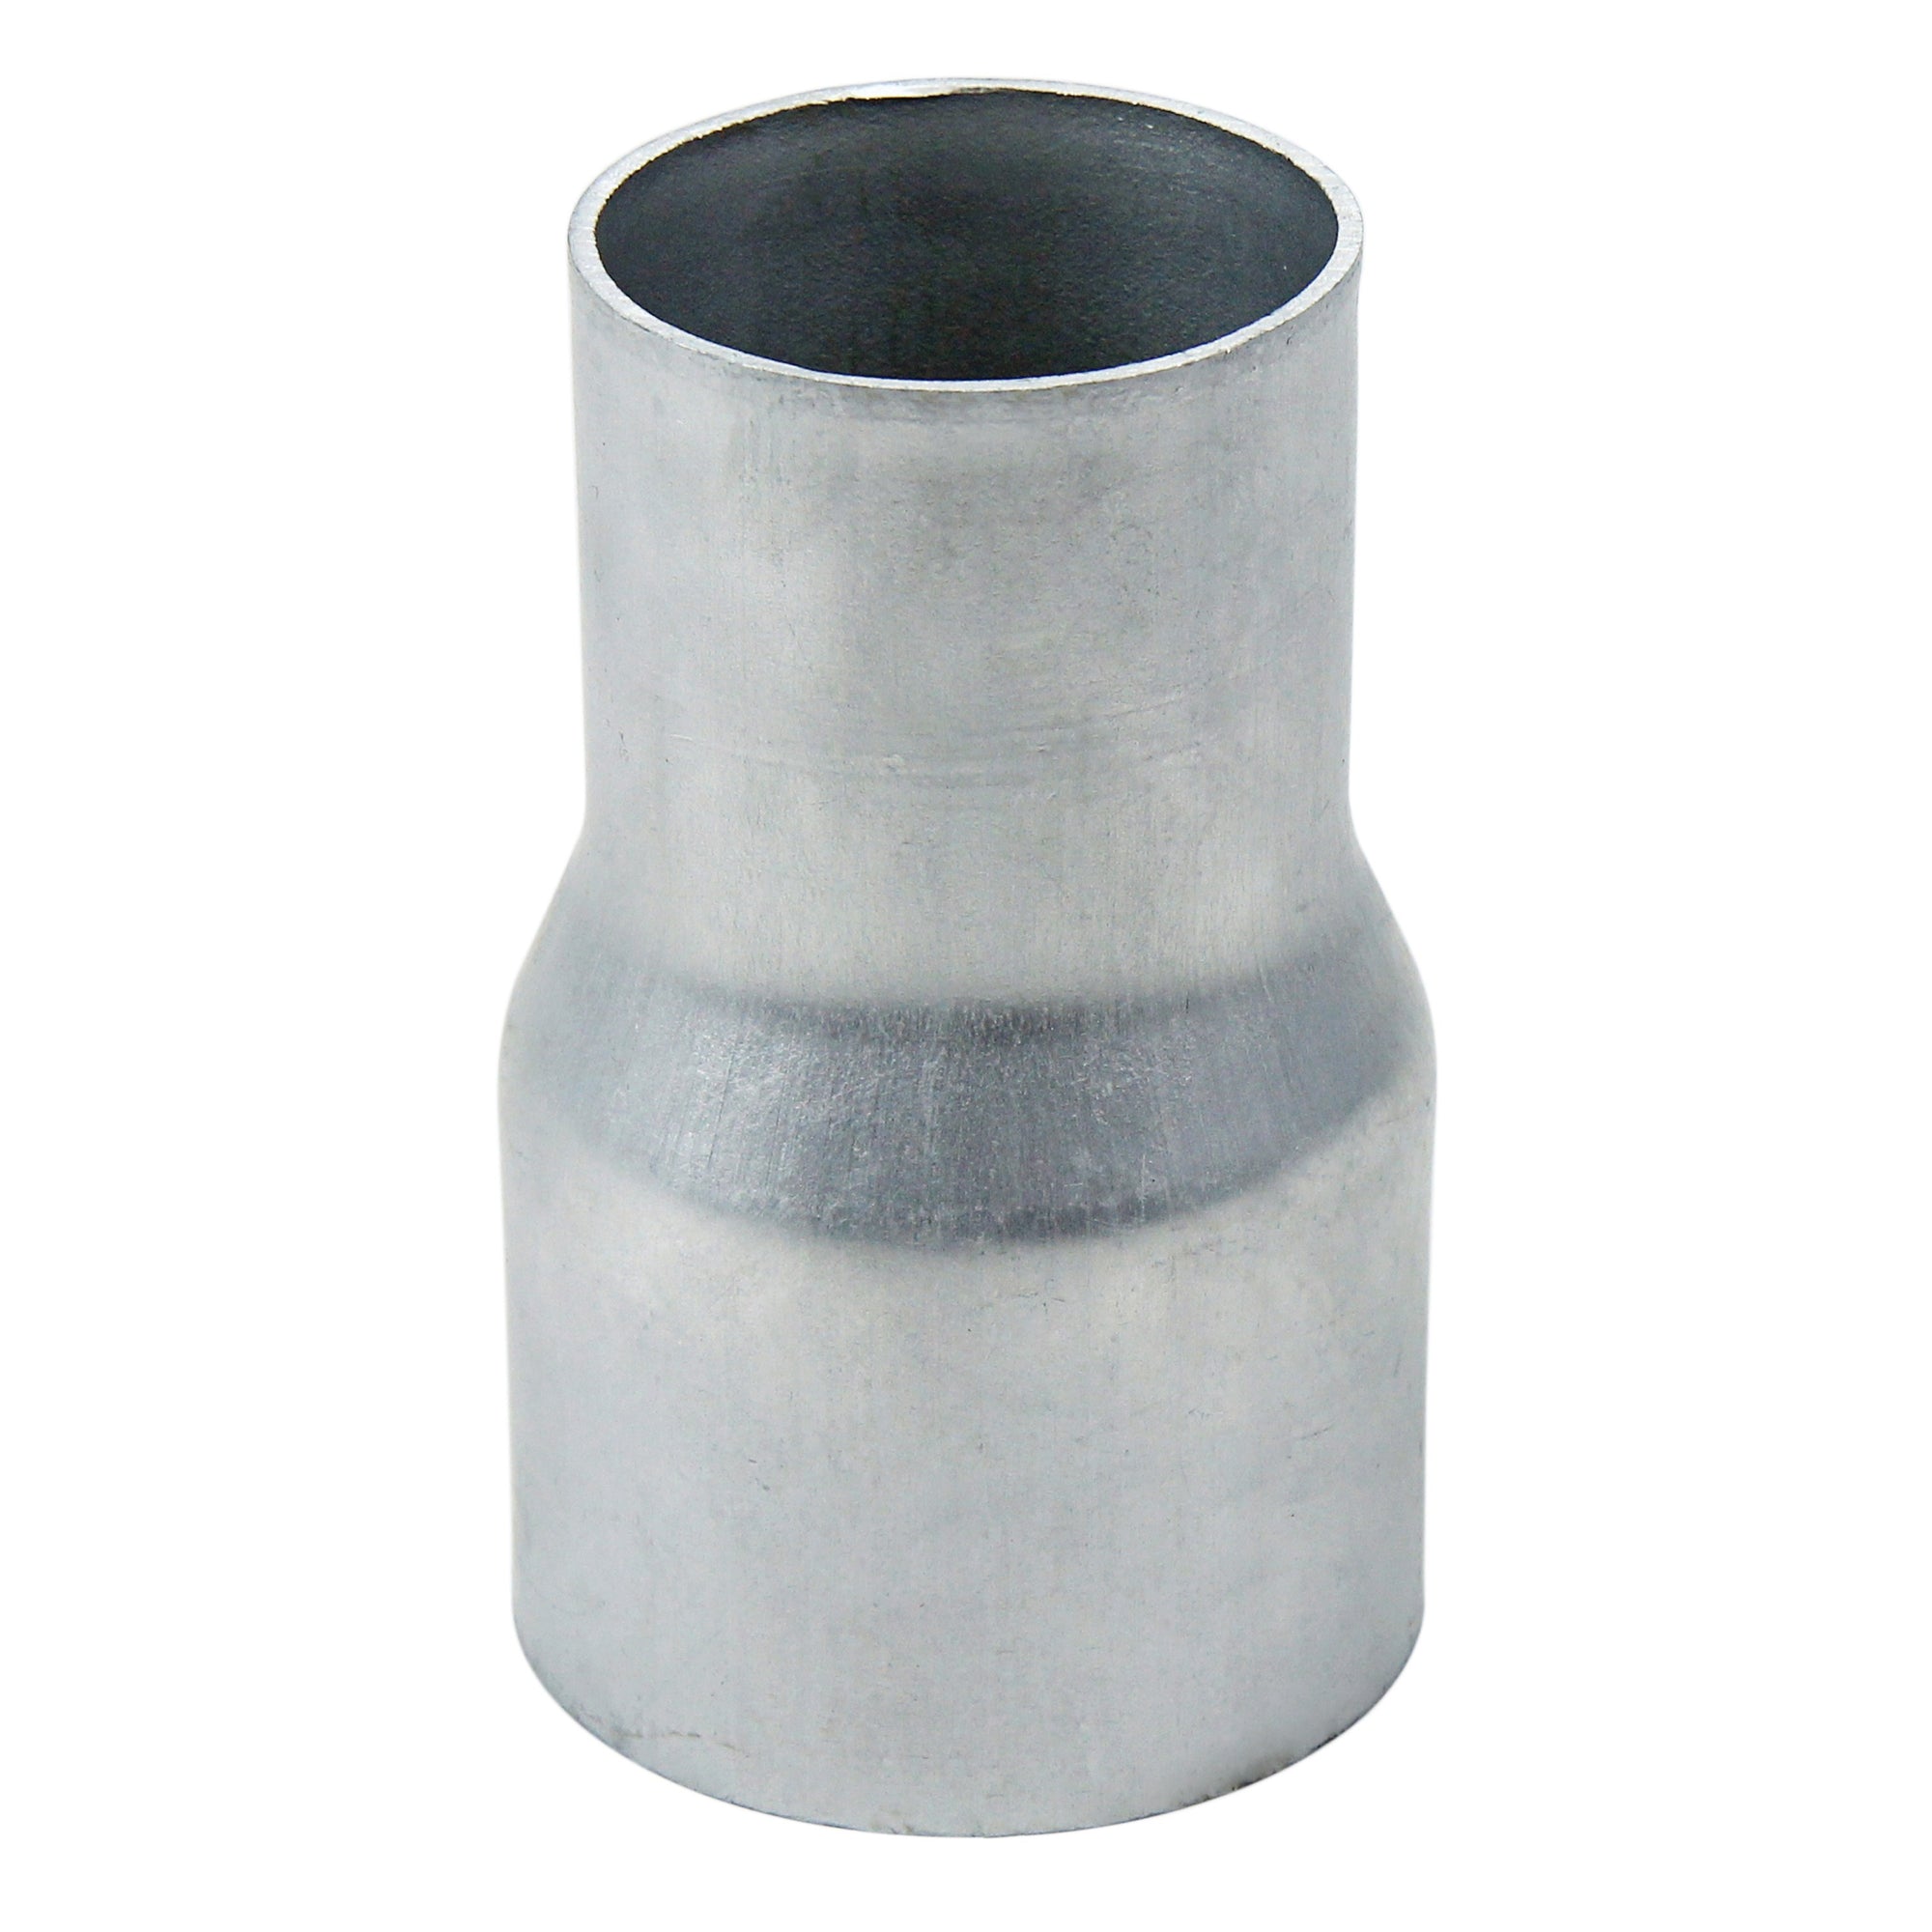 HPS 4.5 inch OD to 4.5 inch ID, 6061 Aluminum Slip Fit Transition Reducer Tube Joiner, 7 inch Long